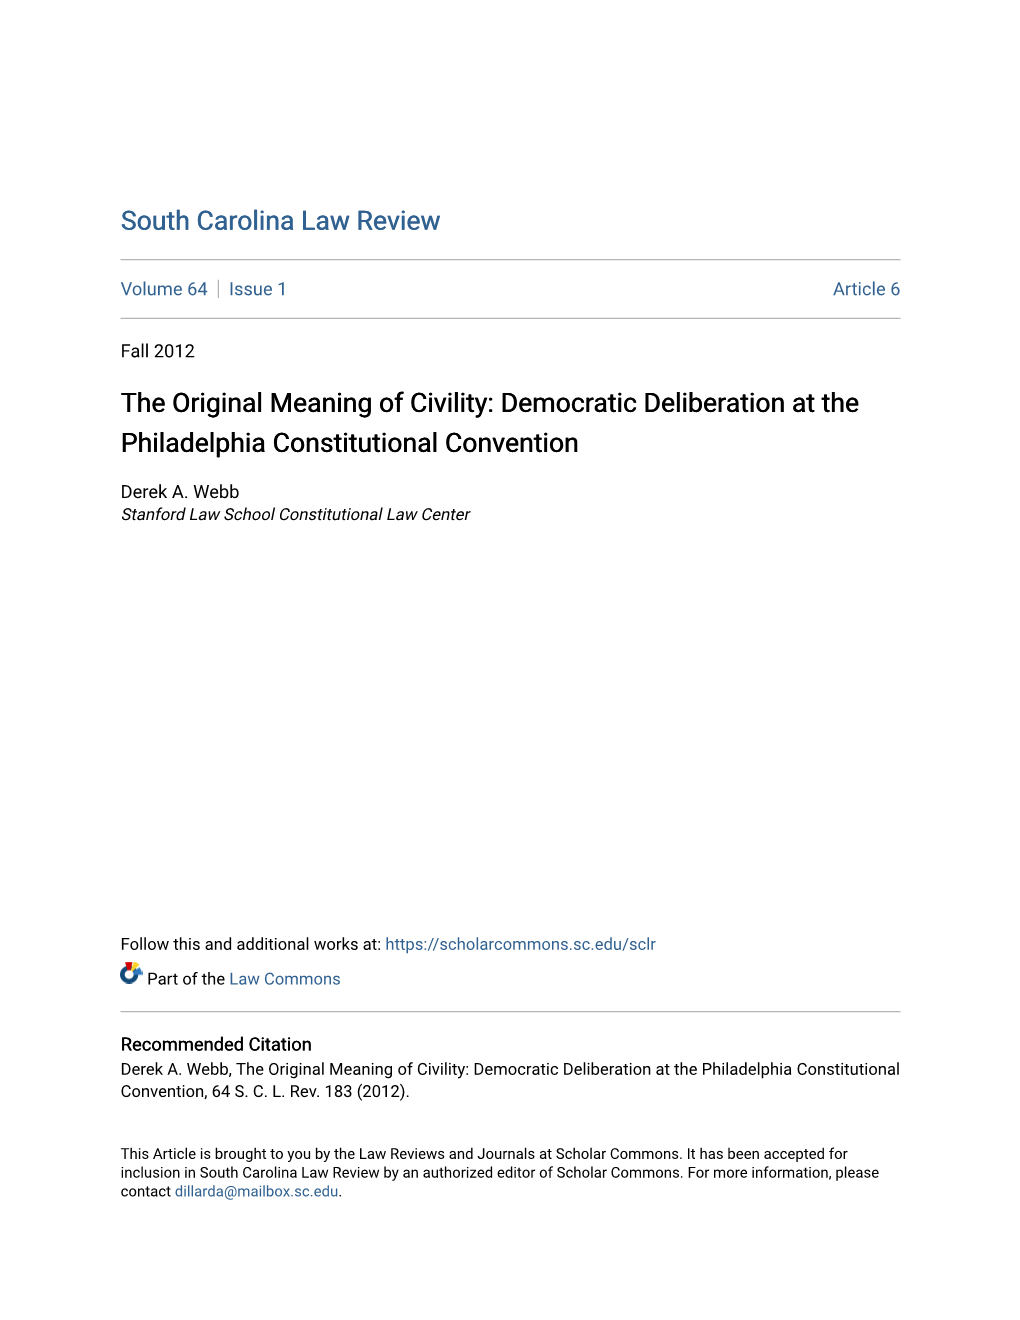 The Original Meaning of Civility: Democratic Deliberation at the Philadelphia Constitutional Convention